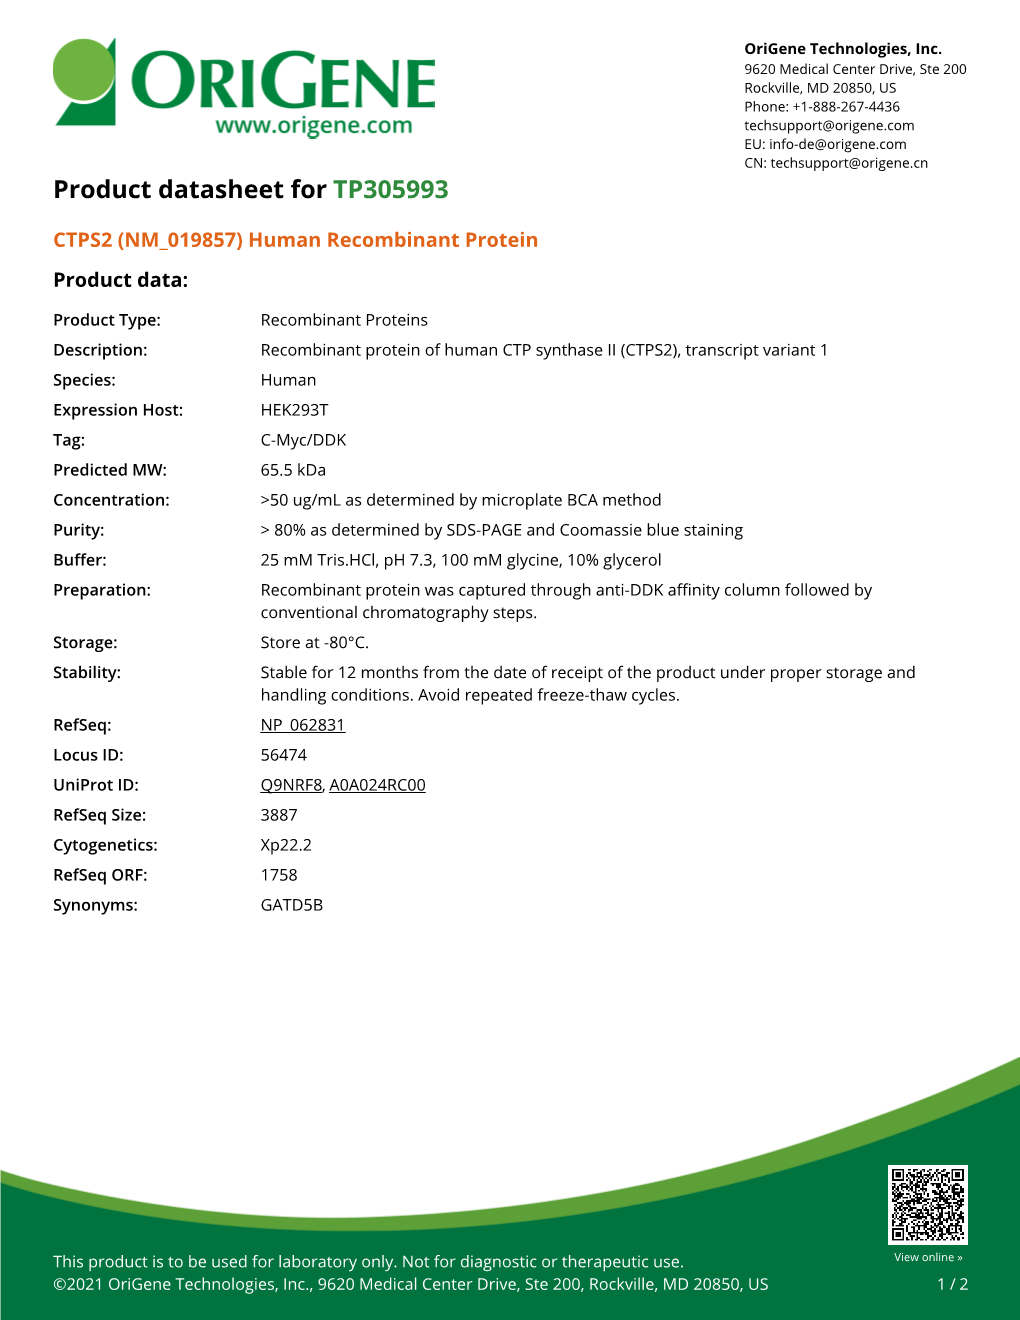 CTPS2 (NM 019857) Human Recombinant Protein Product Data